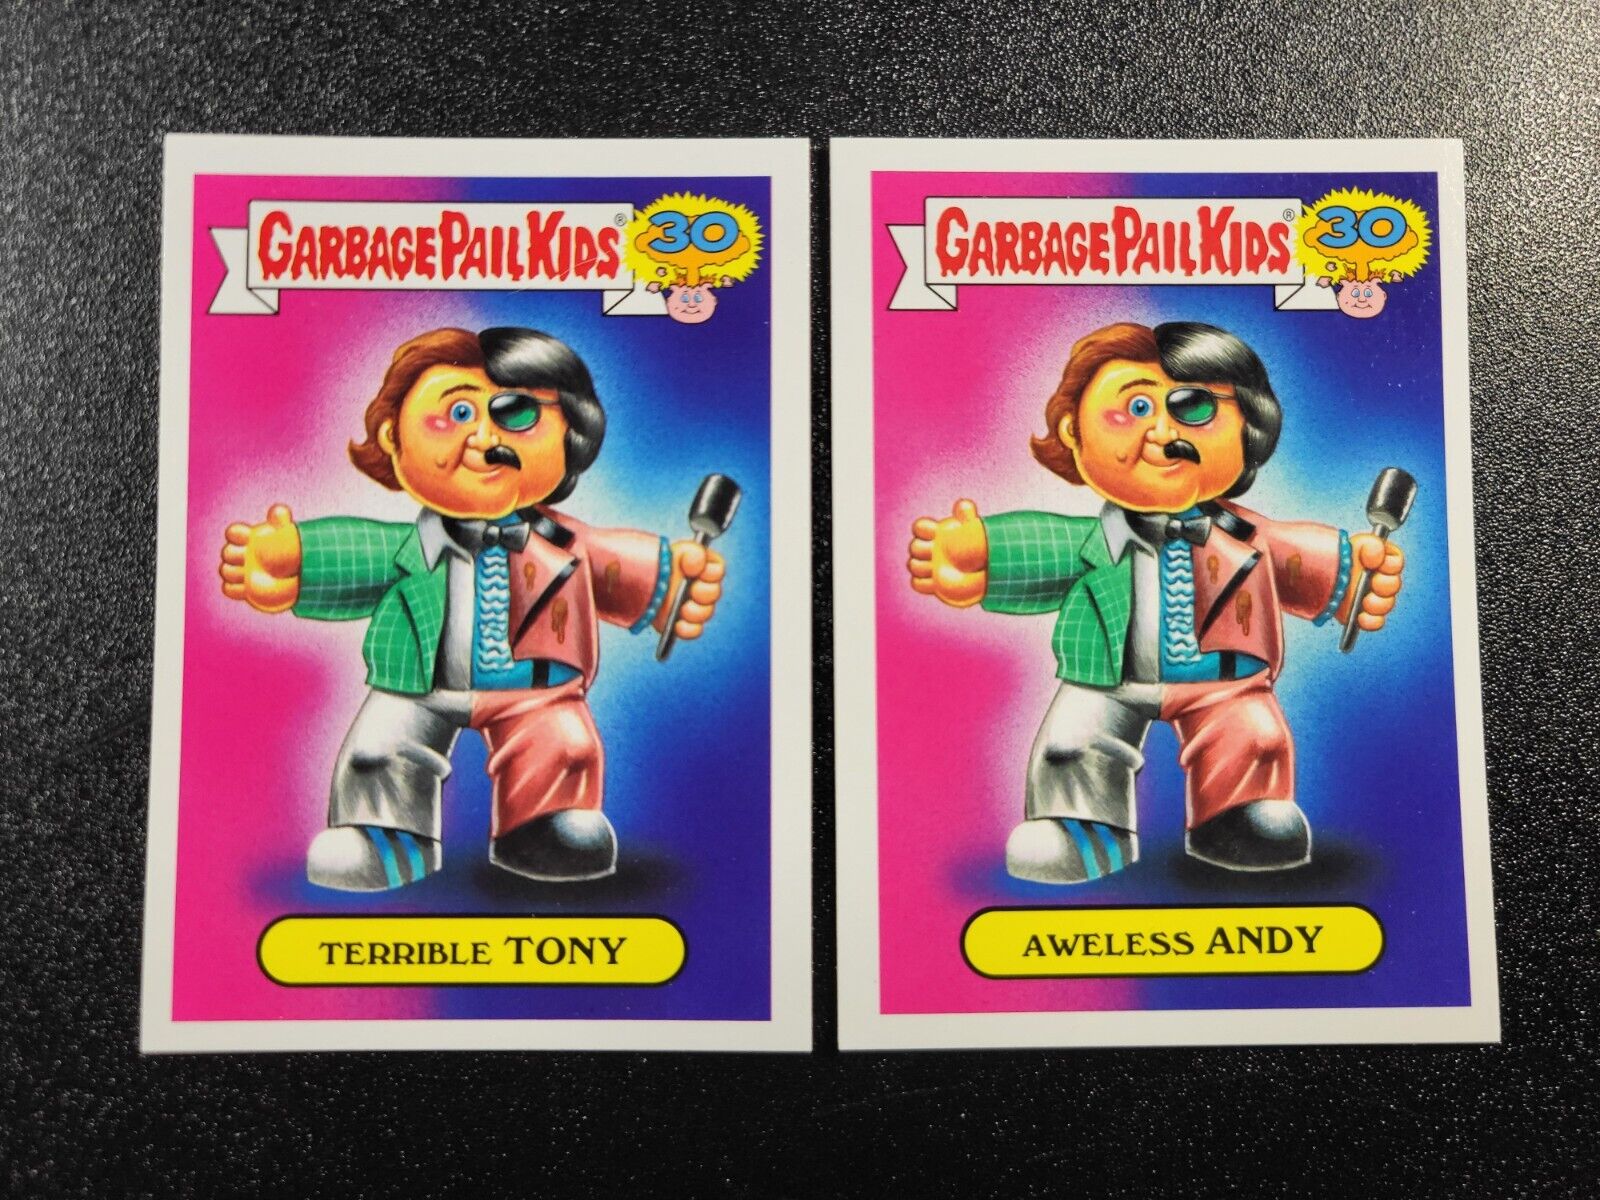 Andy Kaufman Tony Clifton Spoof Garbage Pail Kids 2 Card Set